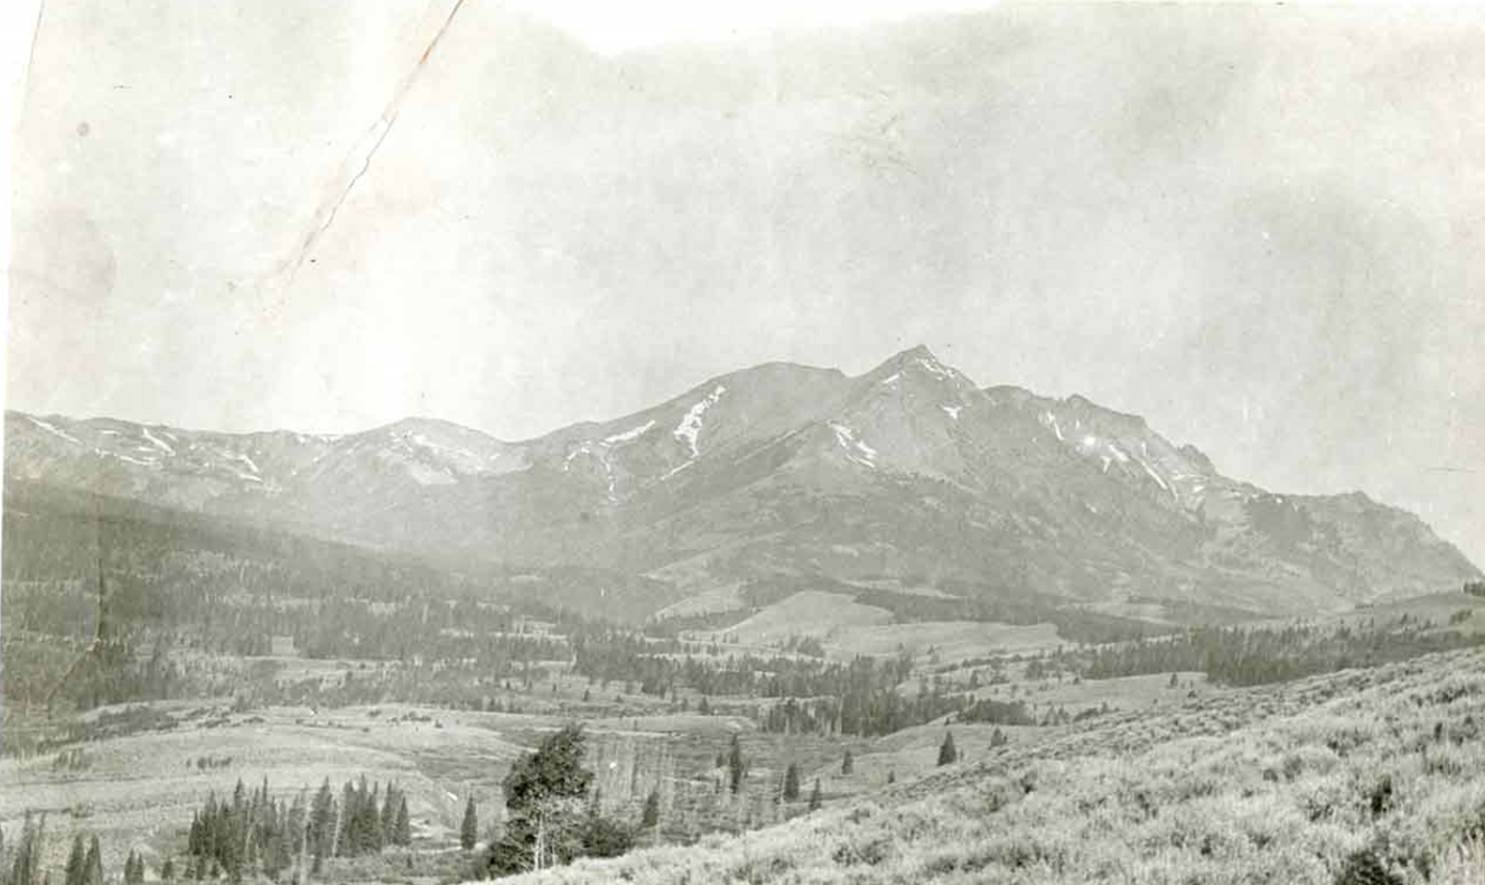 Electric Peak with Gardner River in foreground (YELL 1592)